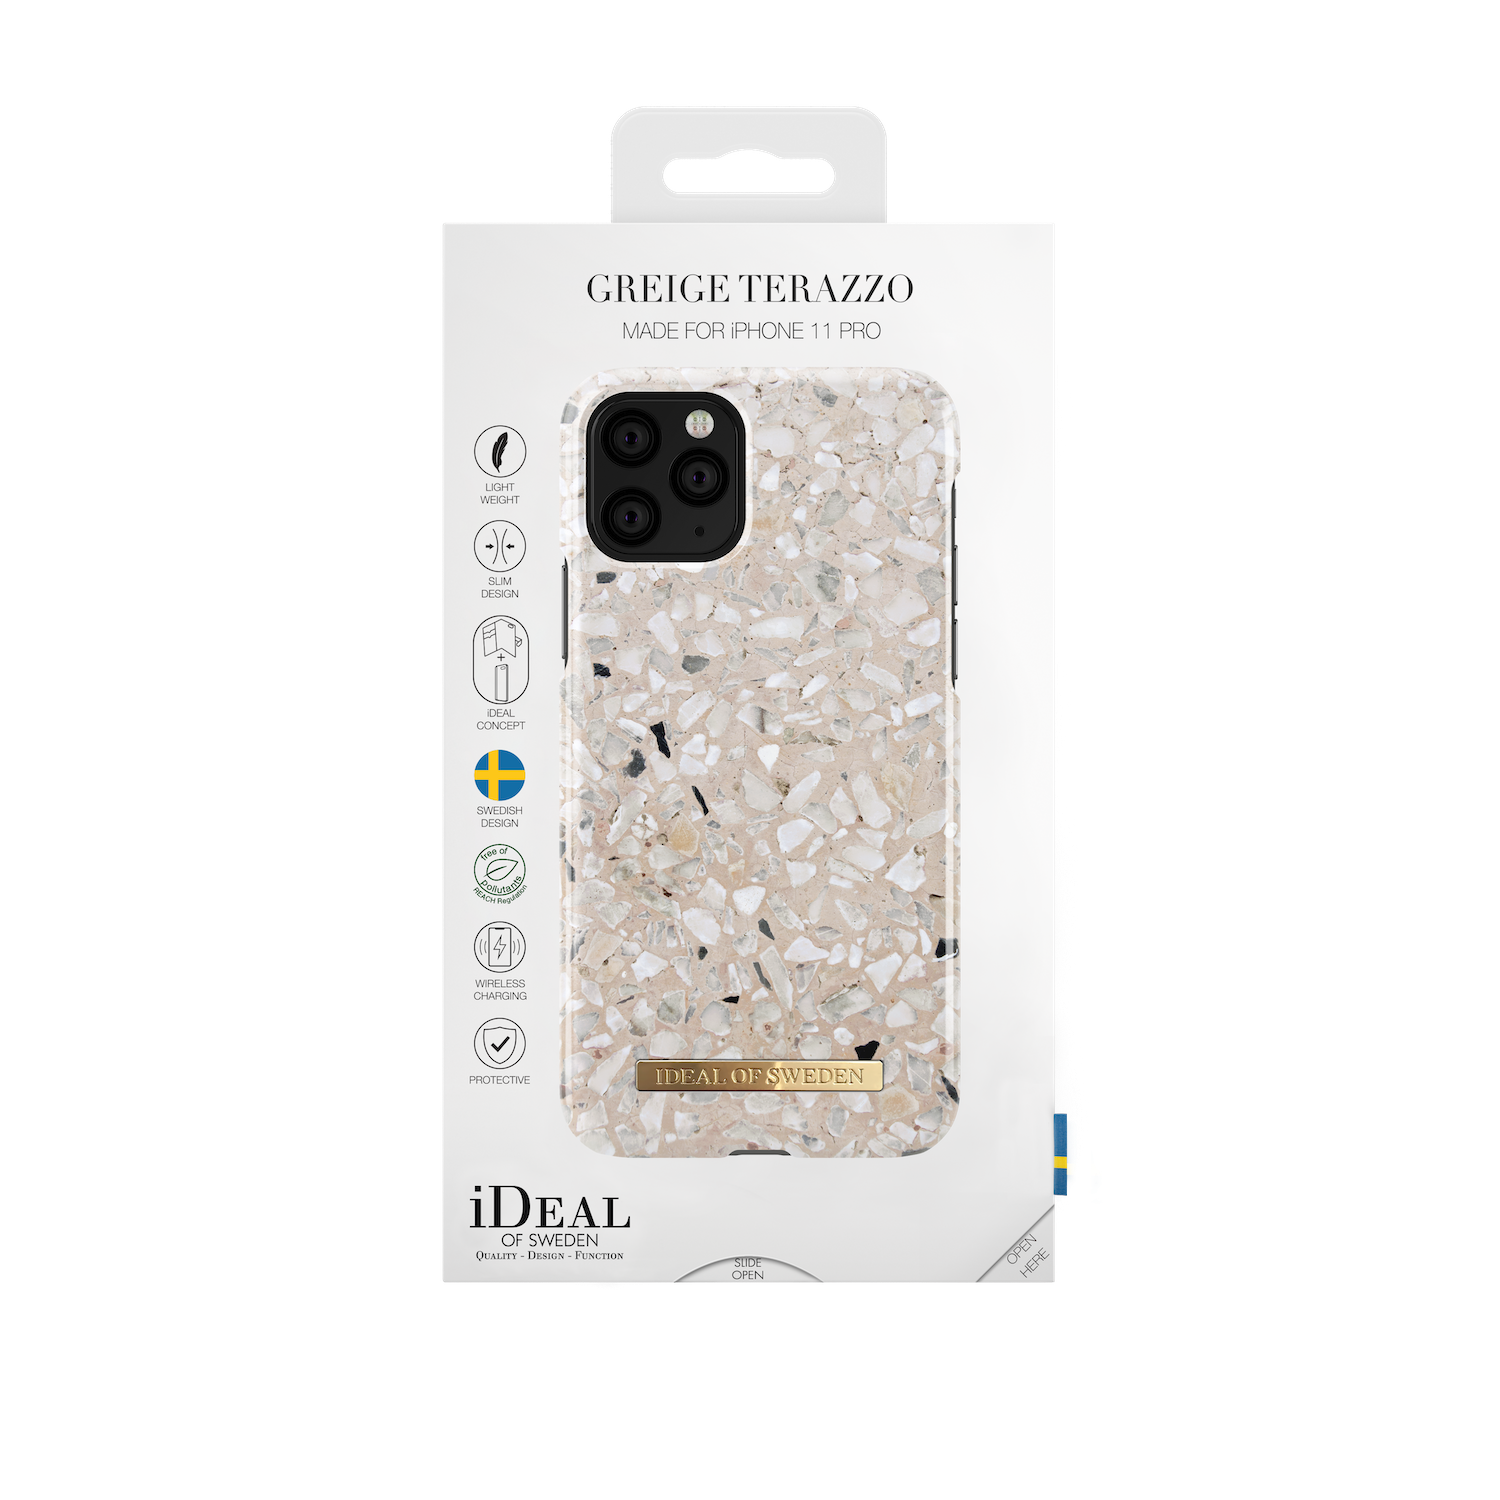 iDeal Of Sweden iPhone 11 Pro 5.8" Fashion Case 2019, Greige Terrazzo